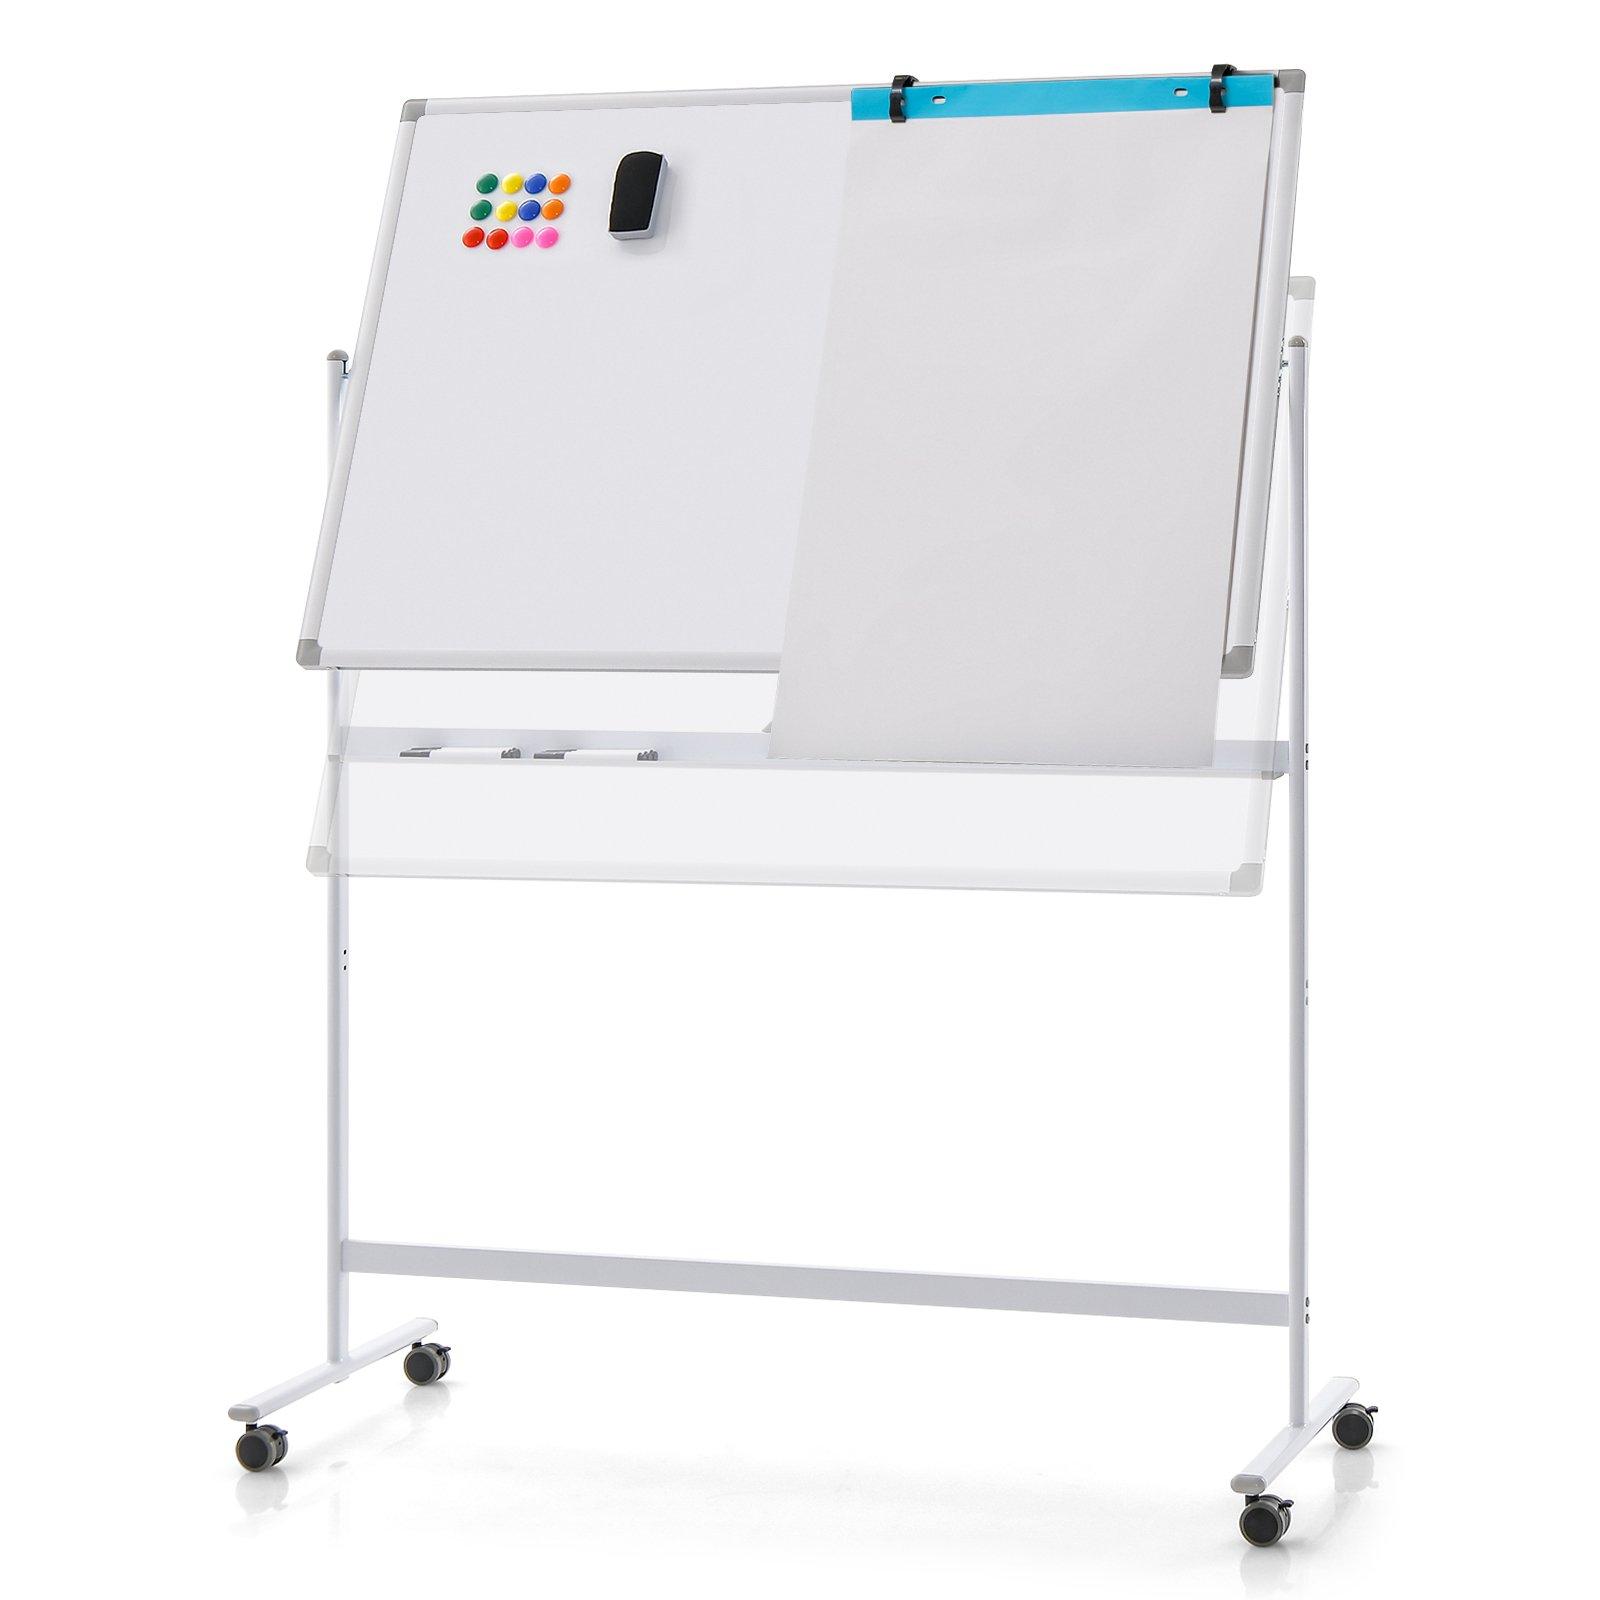 Portable Double-Sided Magnetic Mobile Whiteboard Adjustable Rolling Erase Board